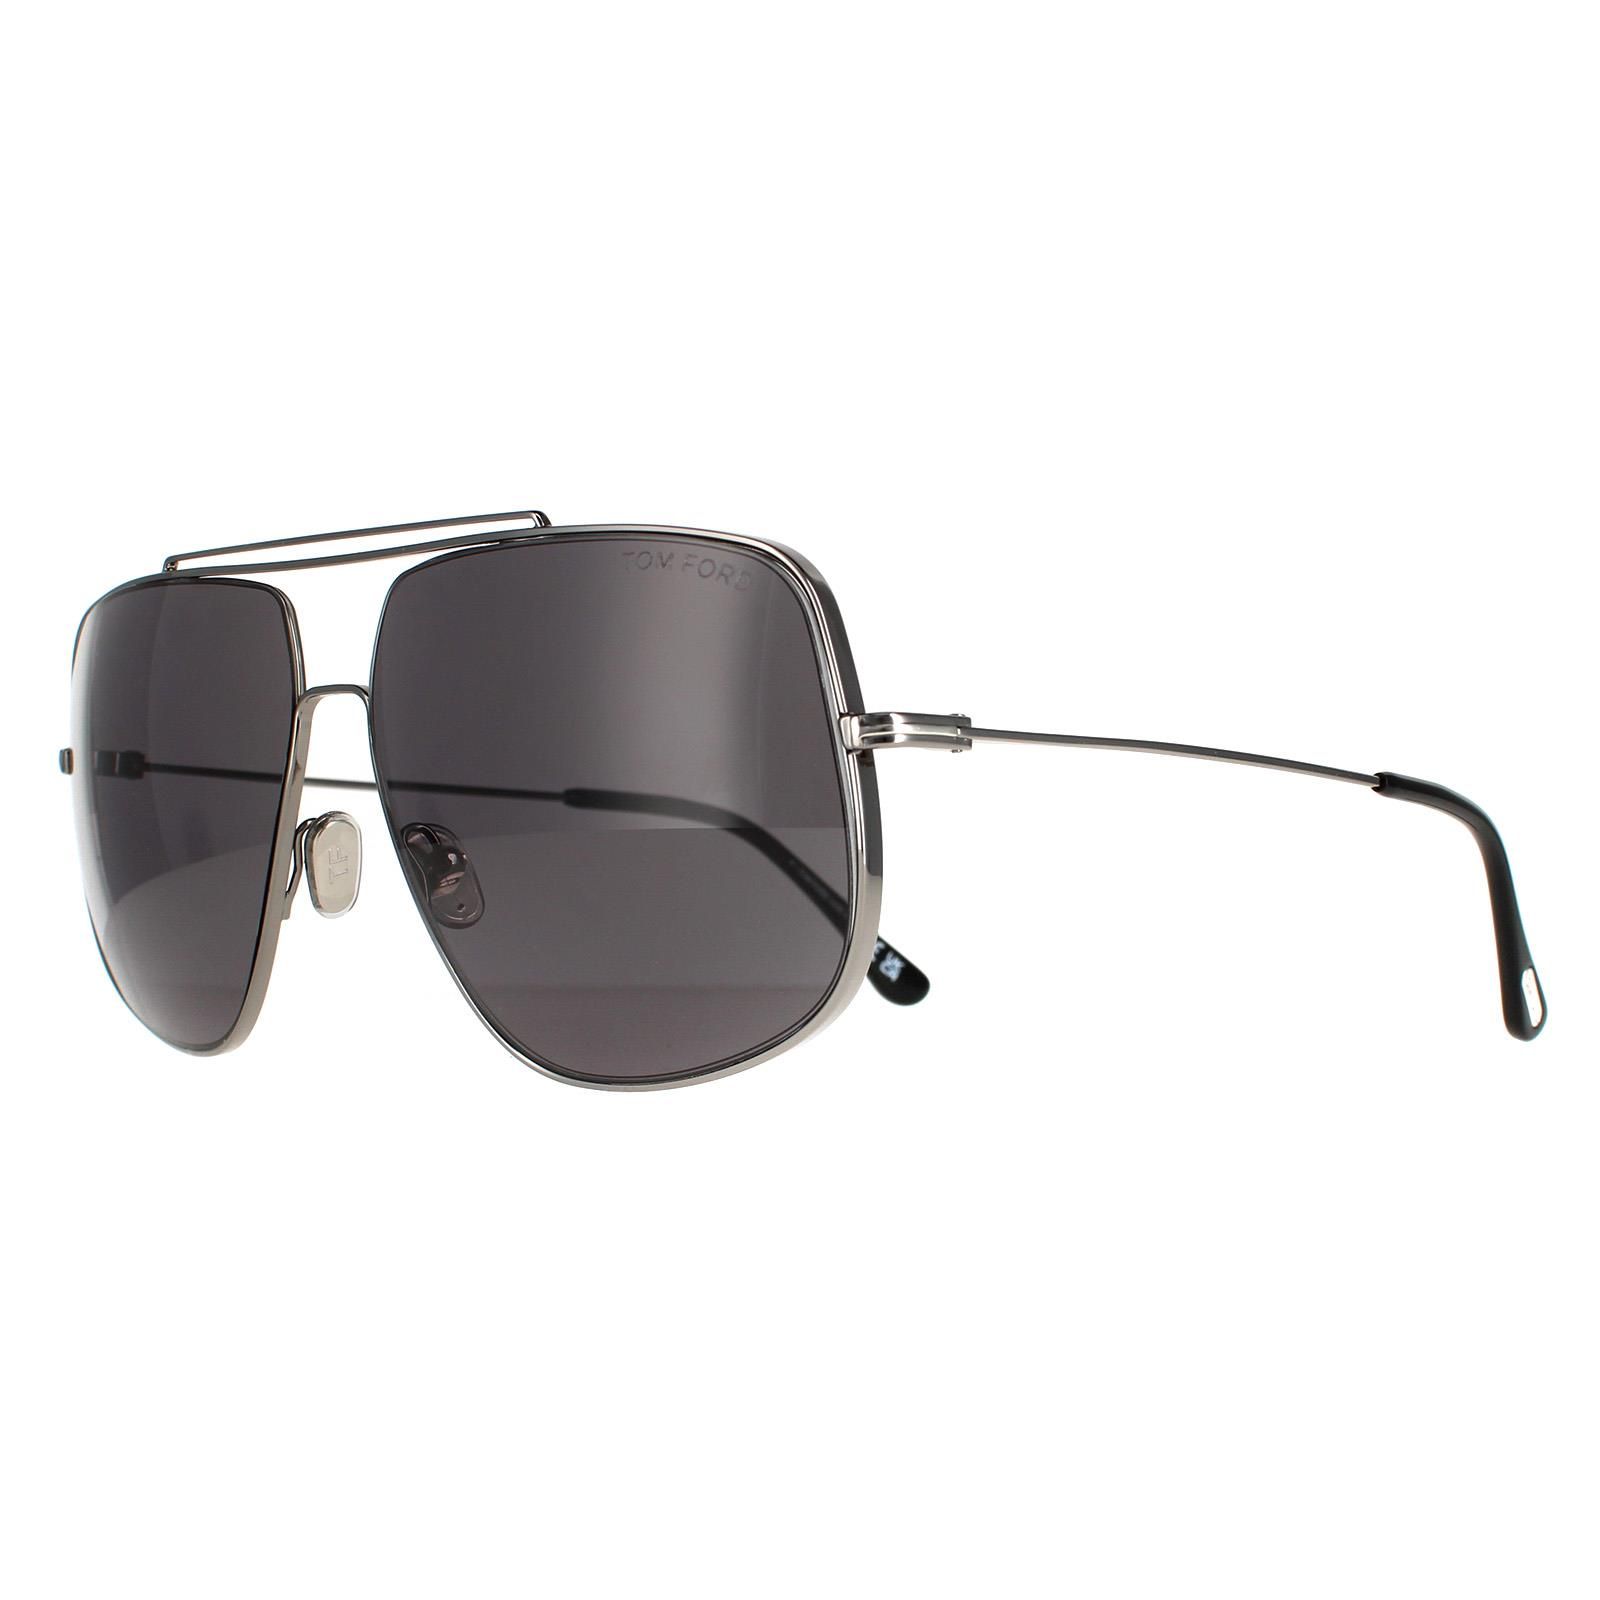 Tom Ford Aviator Mens Ruthenium Grey FT0927 Liam Sunglasses are an oversized square aviator design crafted from lightweight metal and feature a distinctive double brow bar and thin metal temples subtly displaying the Tom Ford T logo.